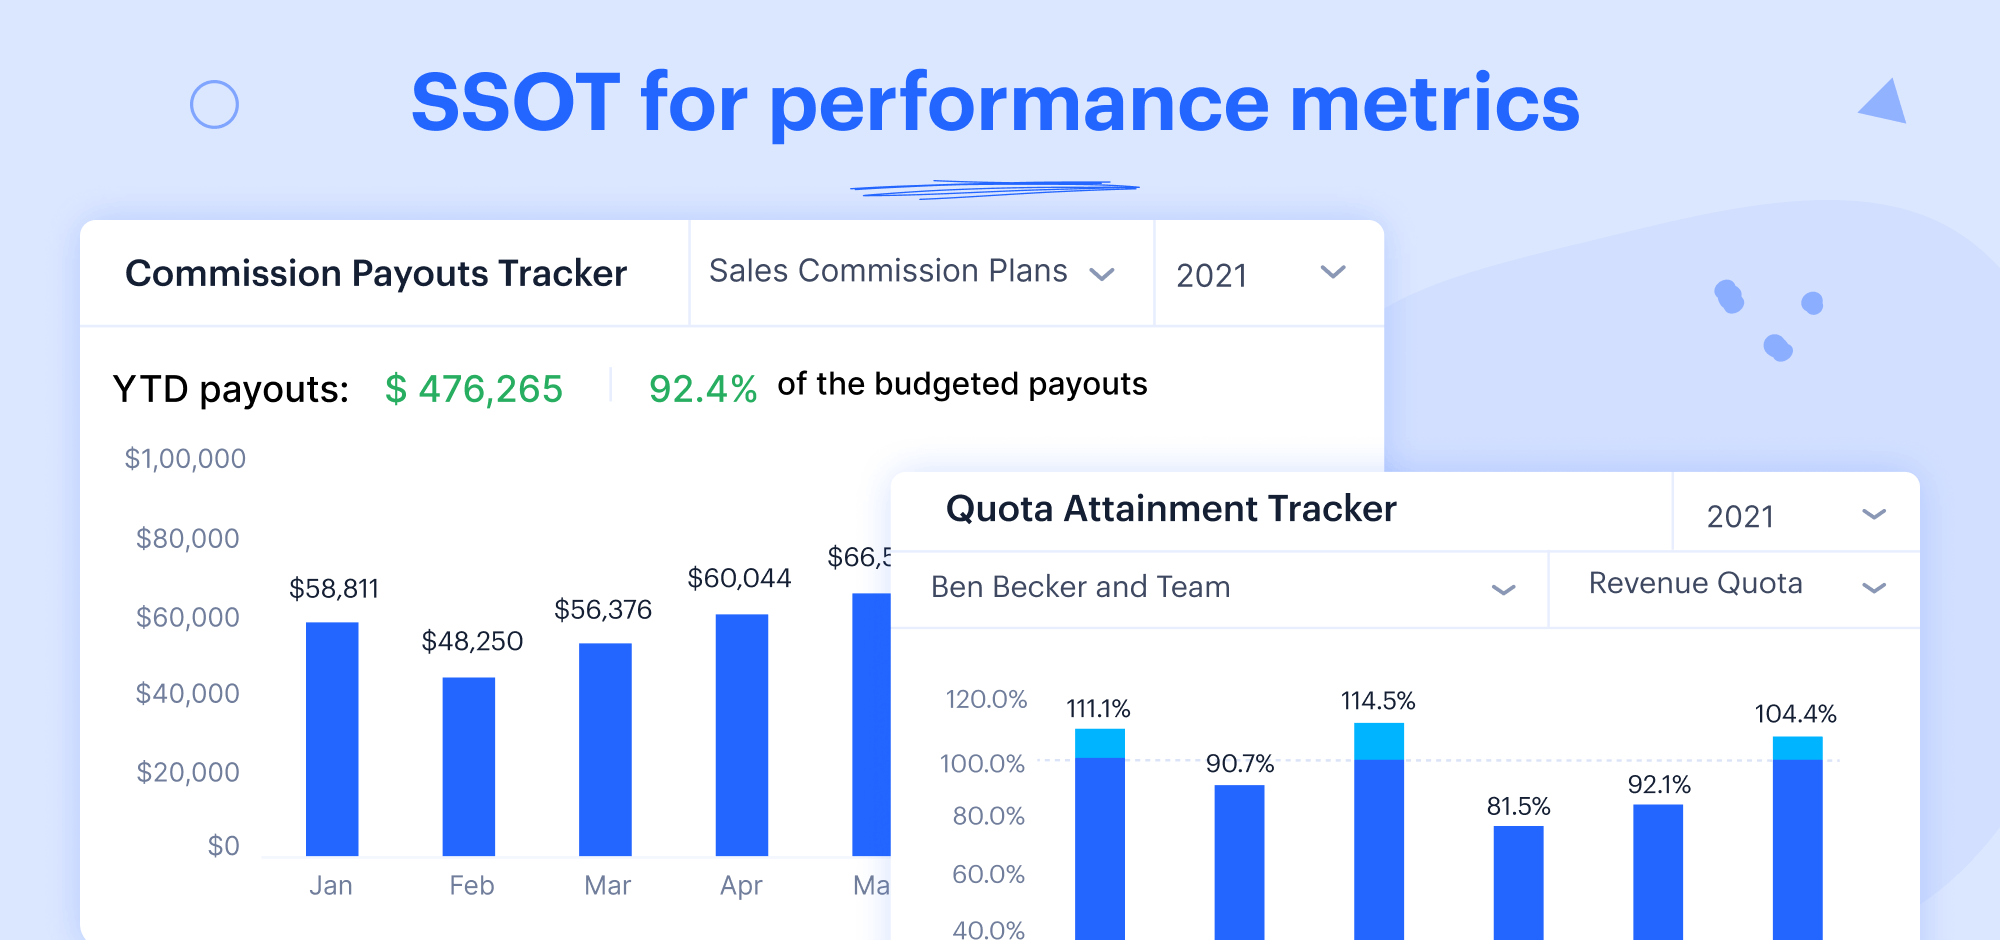 You don’t have to look any further than our Reporting & Analytics tool to get insights on your sales team’s performance.